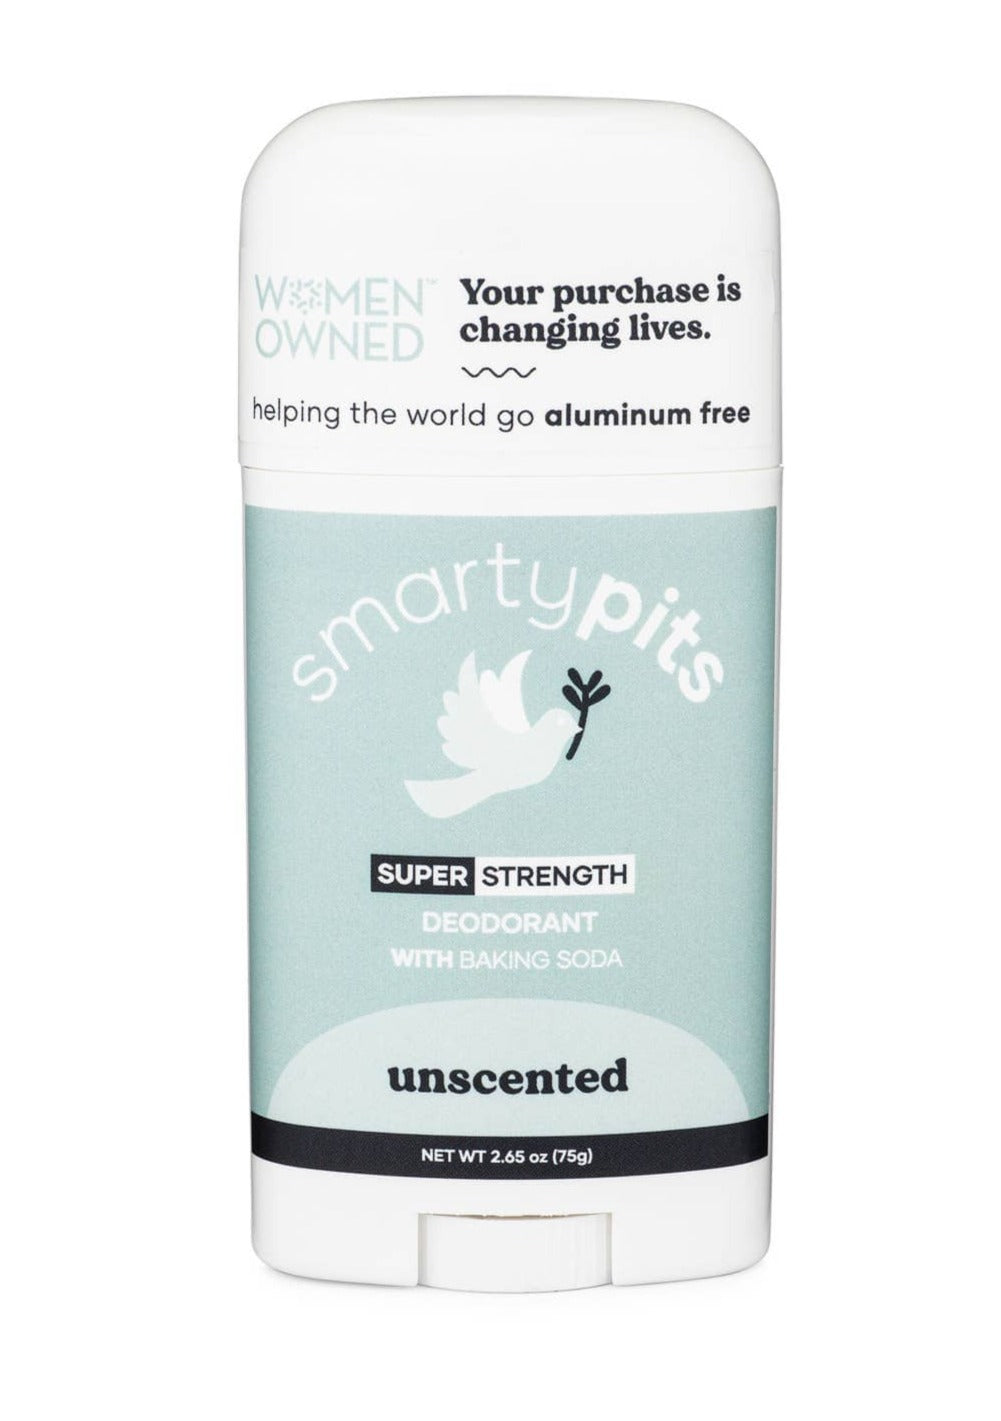 Smarty Pits Natural Deodorant Smarty Pits deodorant Super Strength / Unscented with Baking Soda